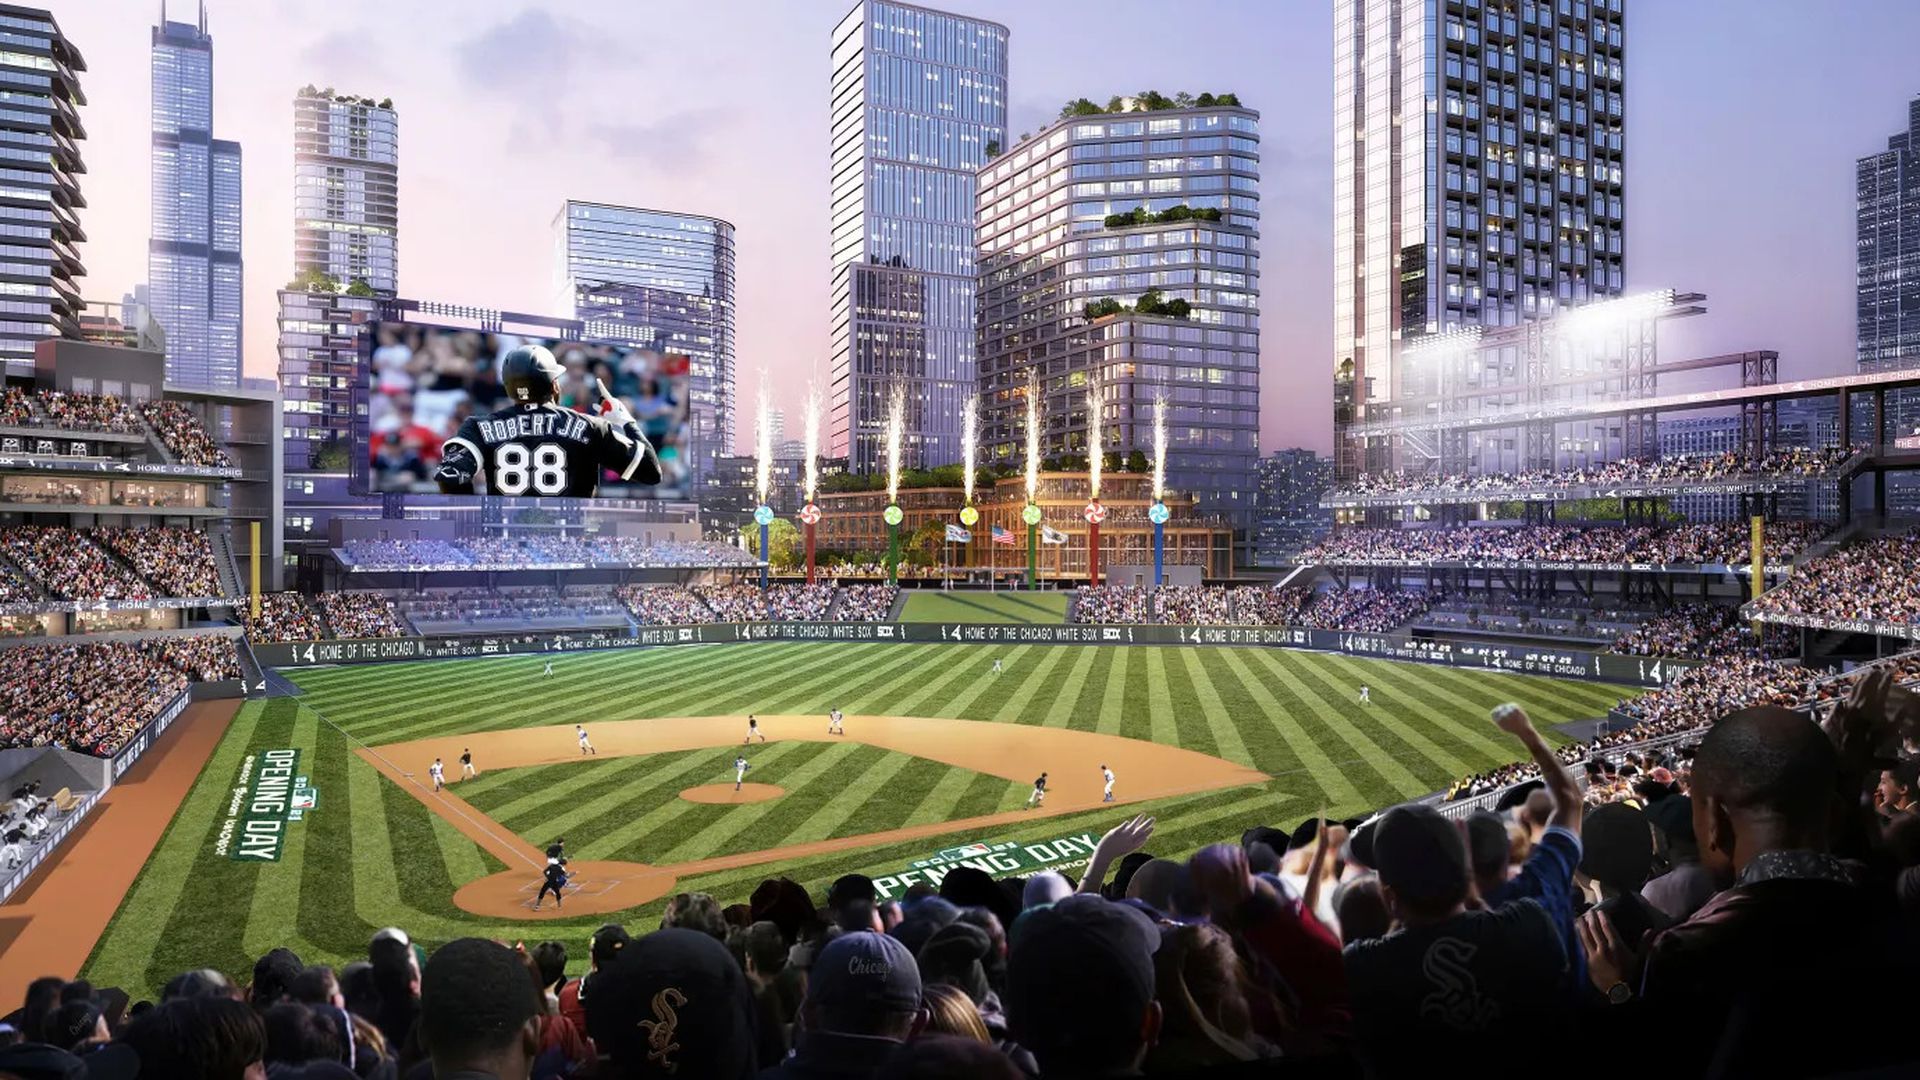 an update on the a’s and white sox stadium situations